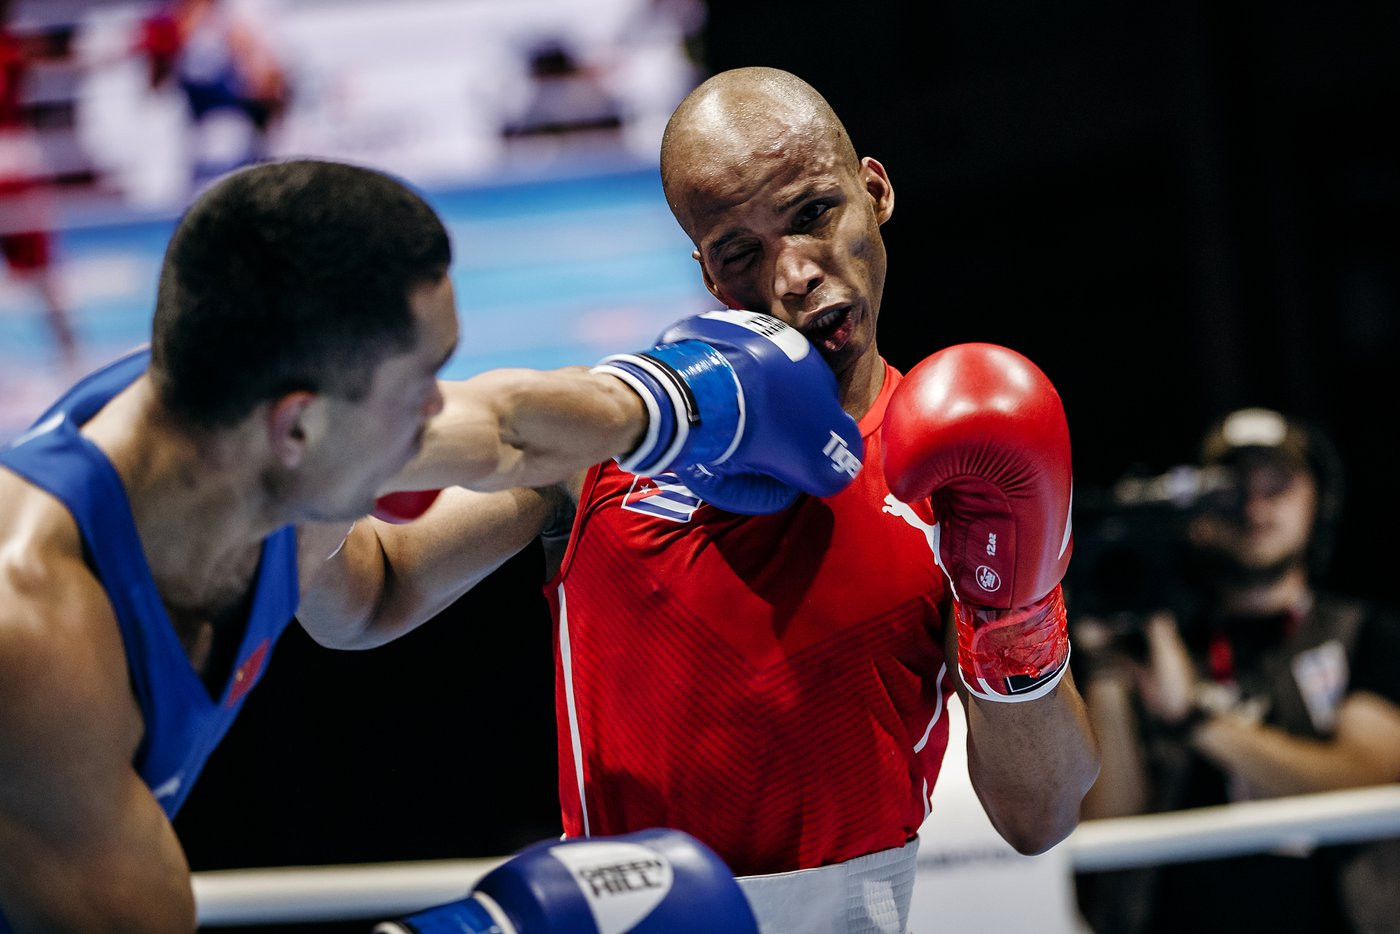 Welterweight top seed Roniel Iglesias of Cuba recorded a unanimous victory at the AIBA World Championships ©Yekaterinburg 2019